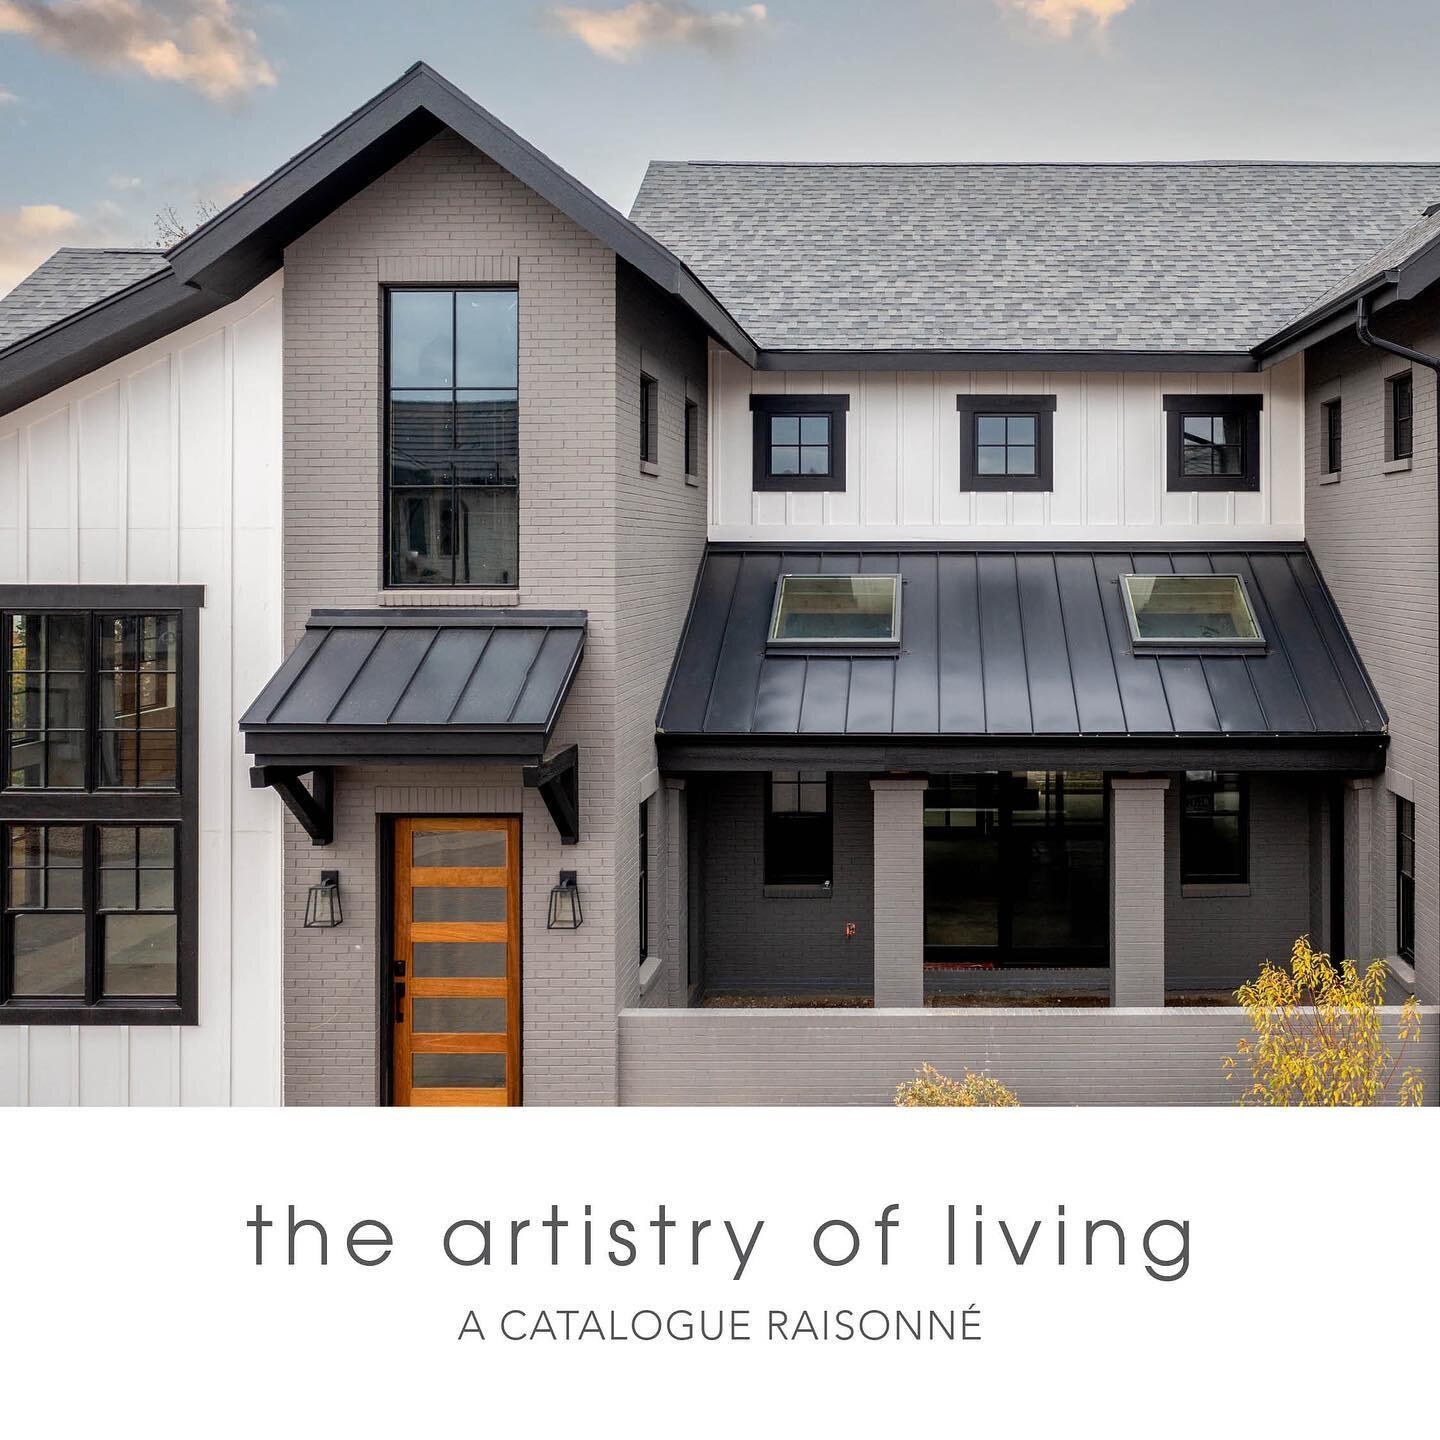 COMPELLING CONTRAST // Artistic reverie envelops the entirety of this newly built masterpiece. // SOLD by milehimodern

experience the full luxury listing magazine in my bio

#milehimodern #thecoolesthomesintown #luxuryrealestate #luxuryhomes #denver